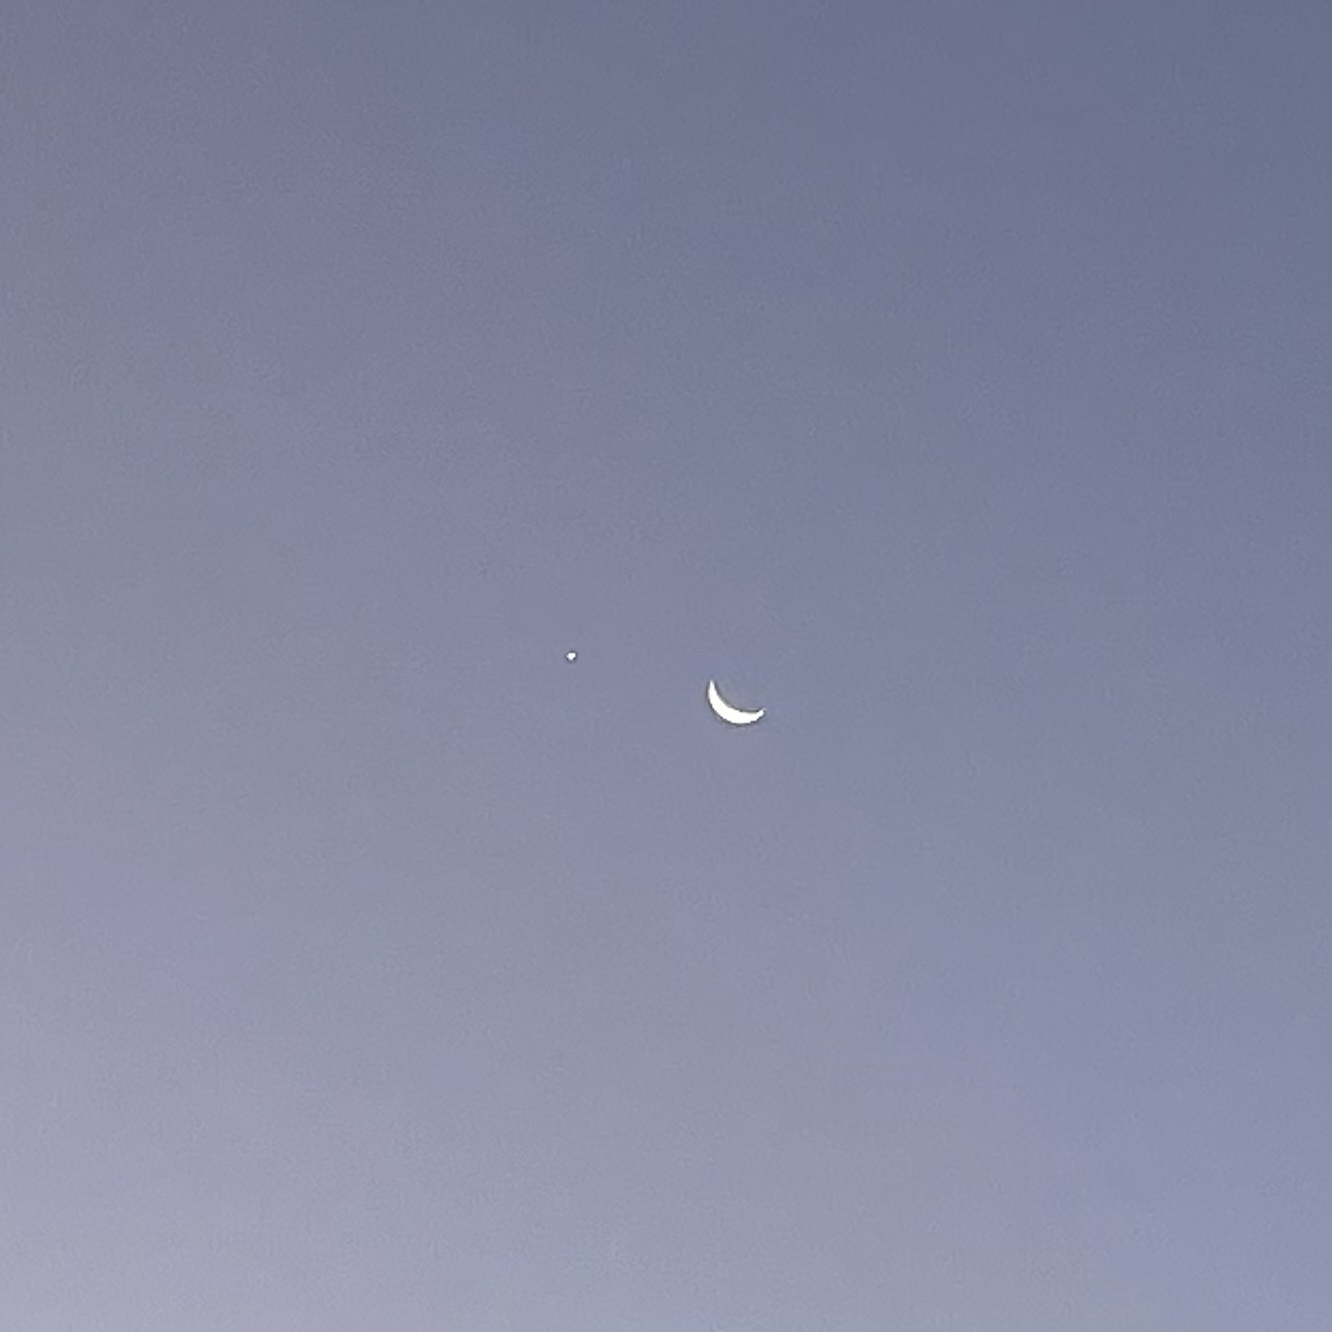 A cresent moon next to a very bright Venus, in a configuration that makes it look like two eyes, with one (the moon) winking.